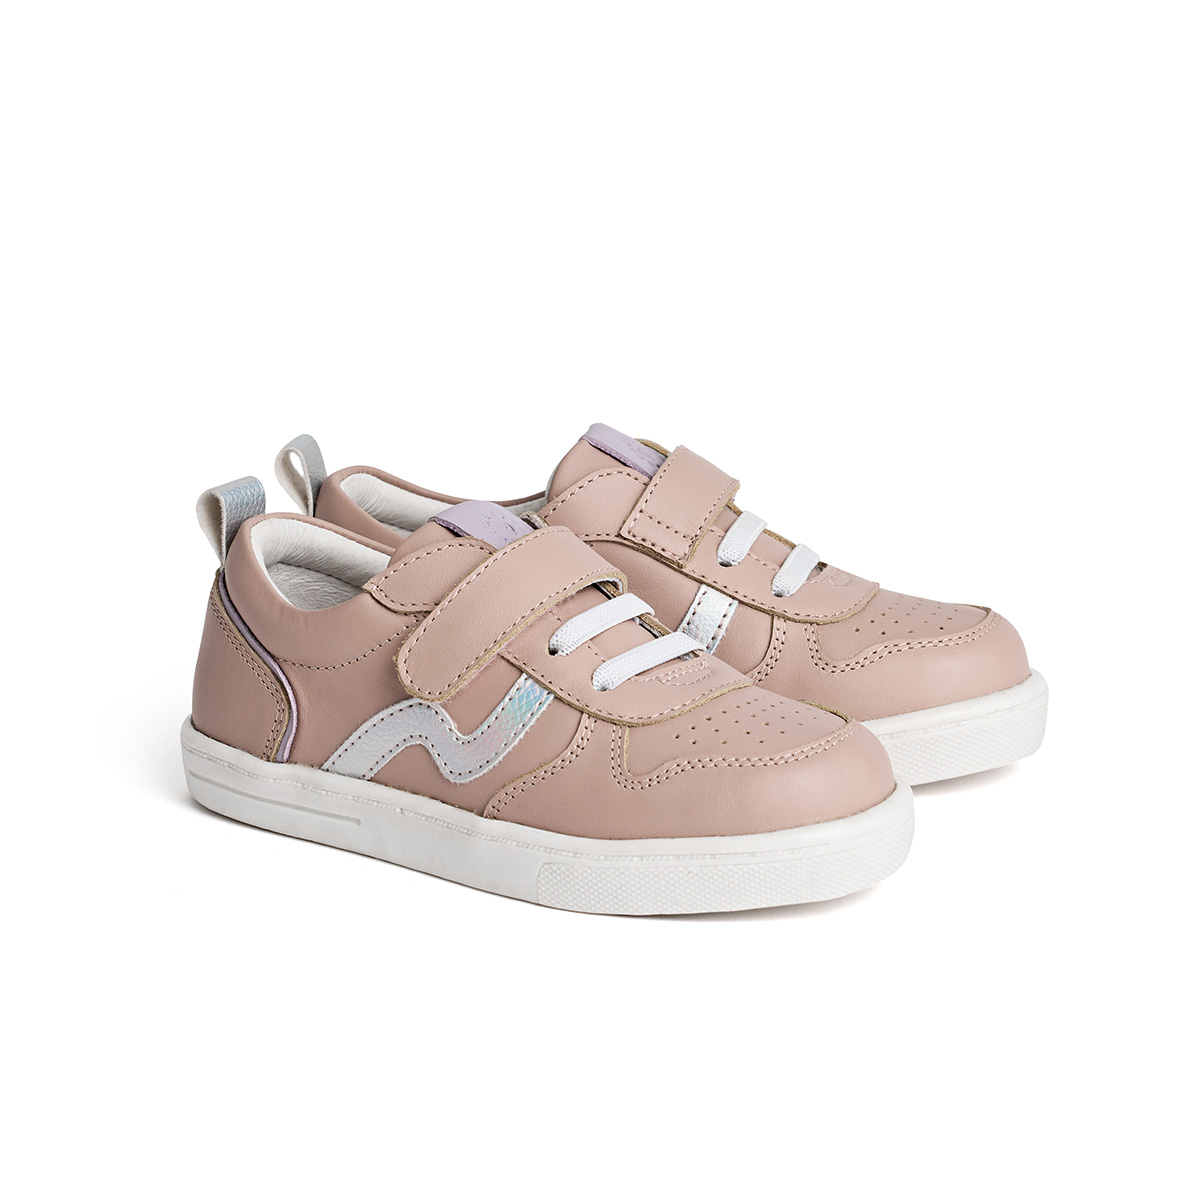 XO Trainer / Blush - Woodend General